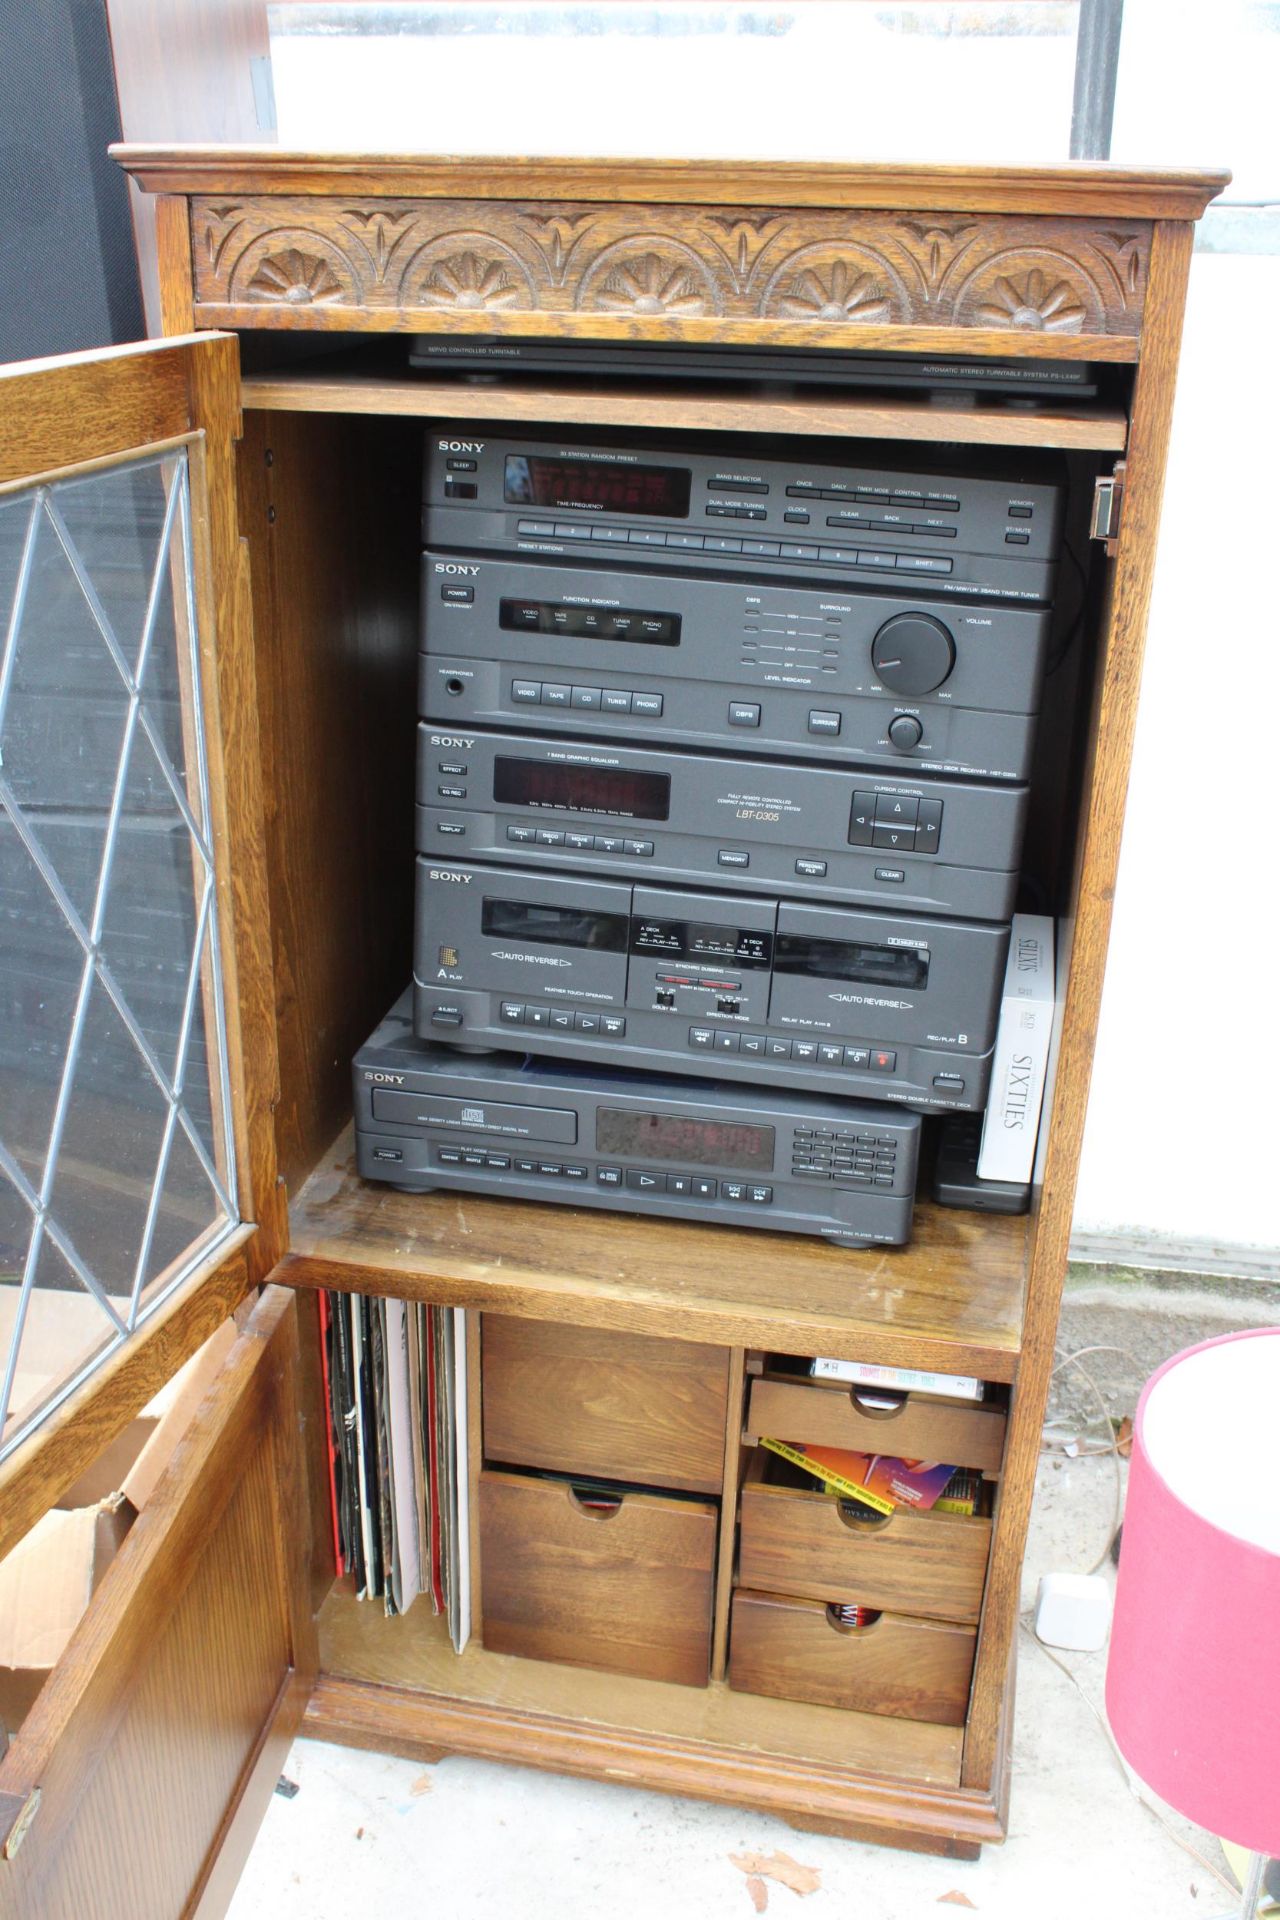 AN OAK RECORD CABINET CONTAINING A SONY COMPACT HI-FI STEREO SYSTEM - Image 2 of 2